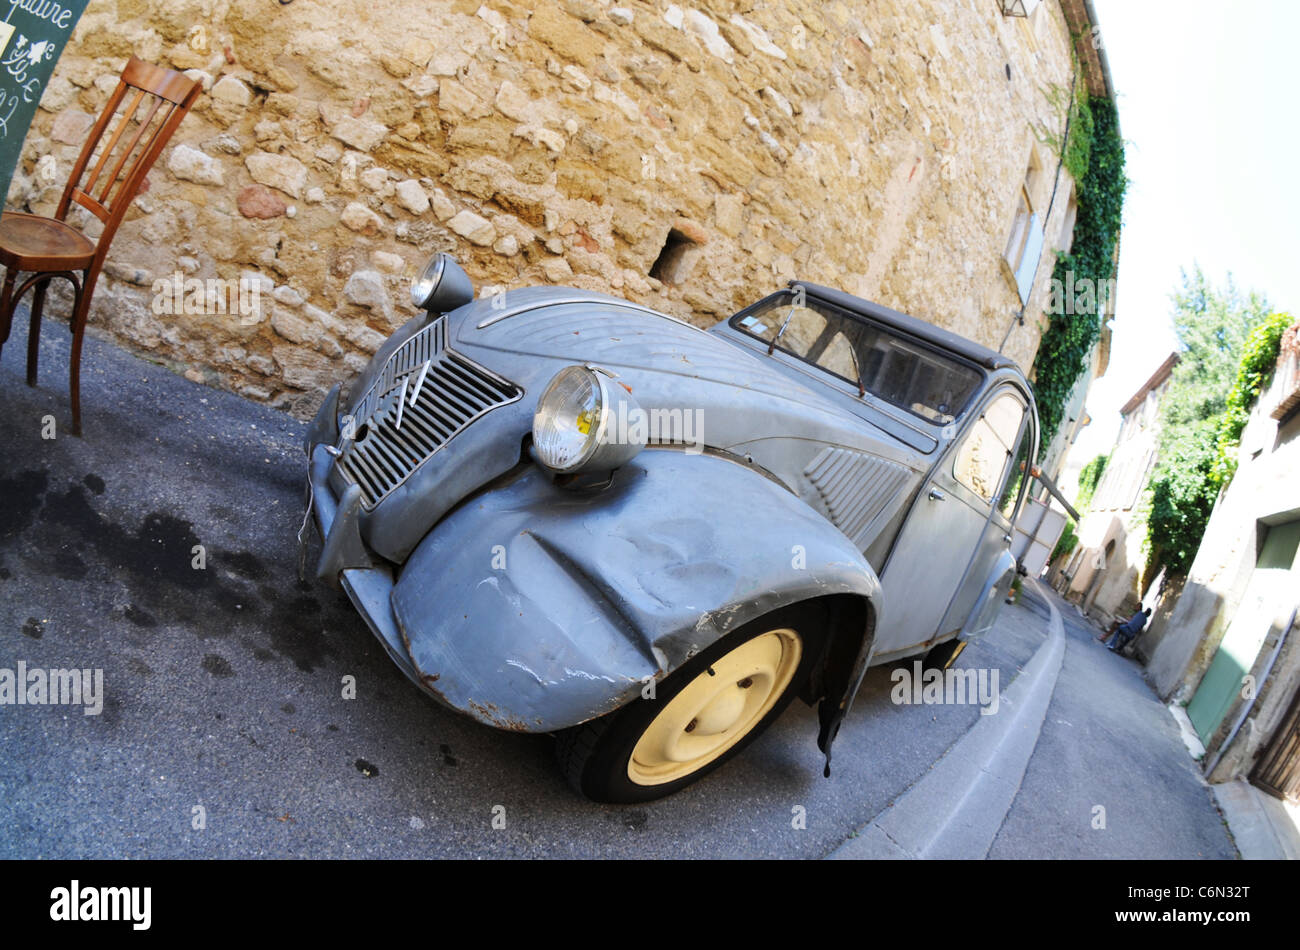 old Citroen 2cv model AZL from 1957 in Lourmarin town, Vaucluse department in Provence region, France Stock Photo